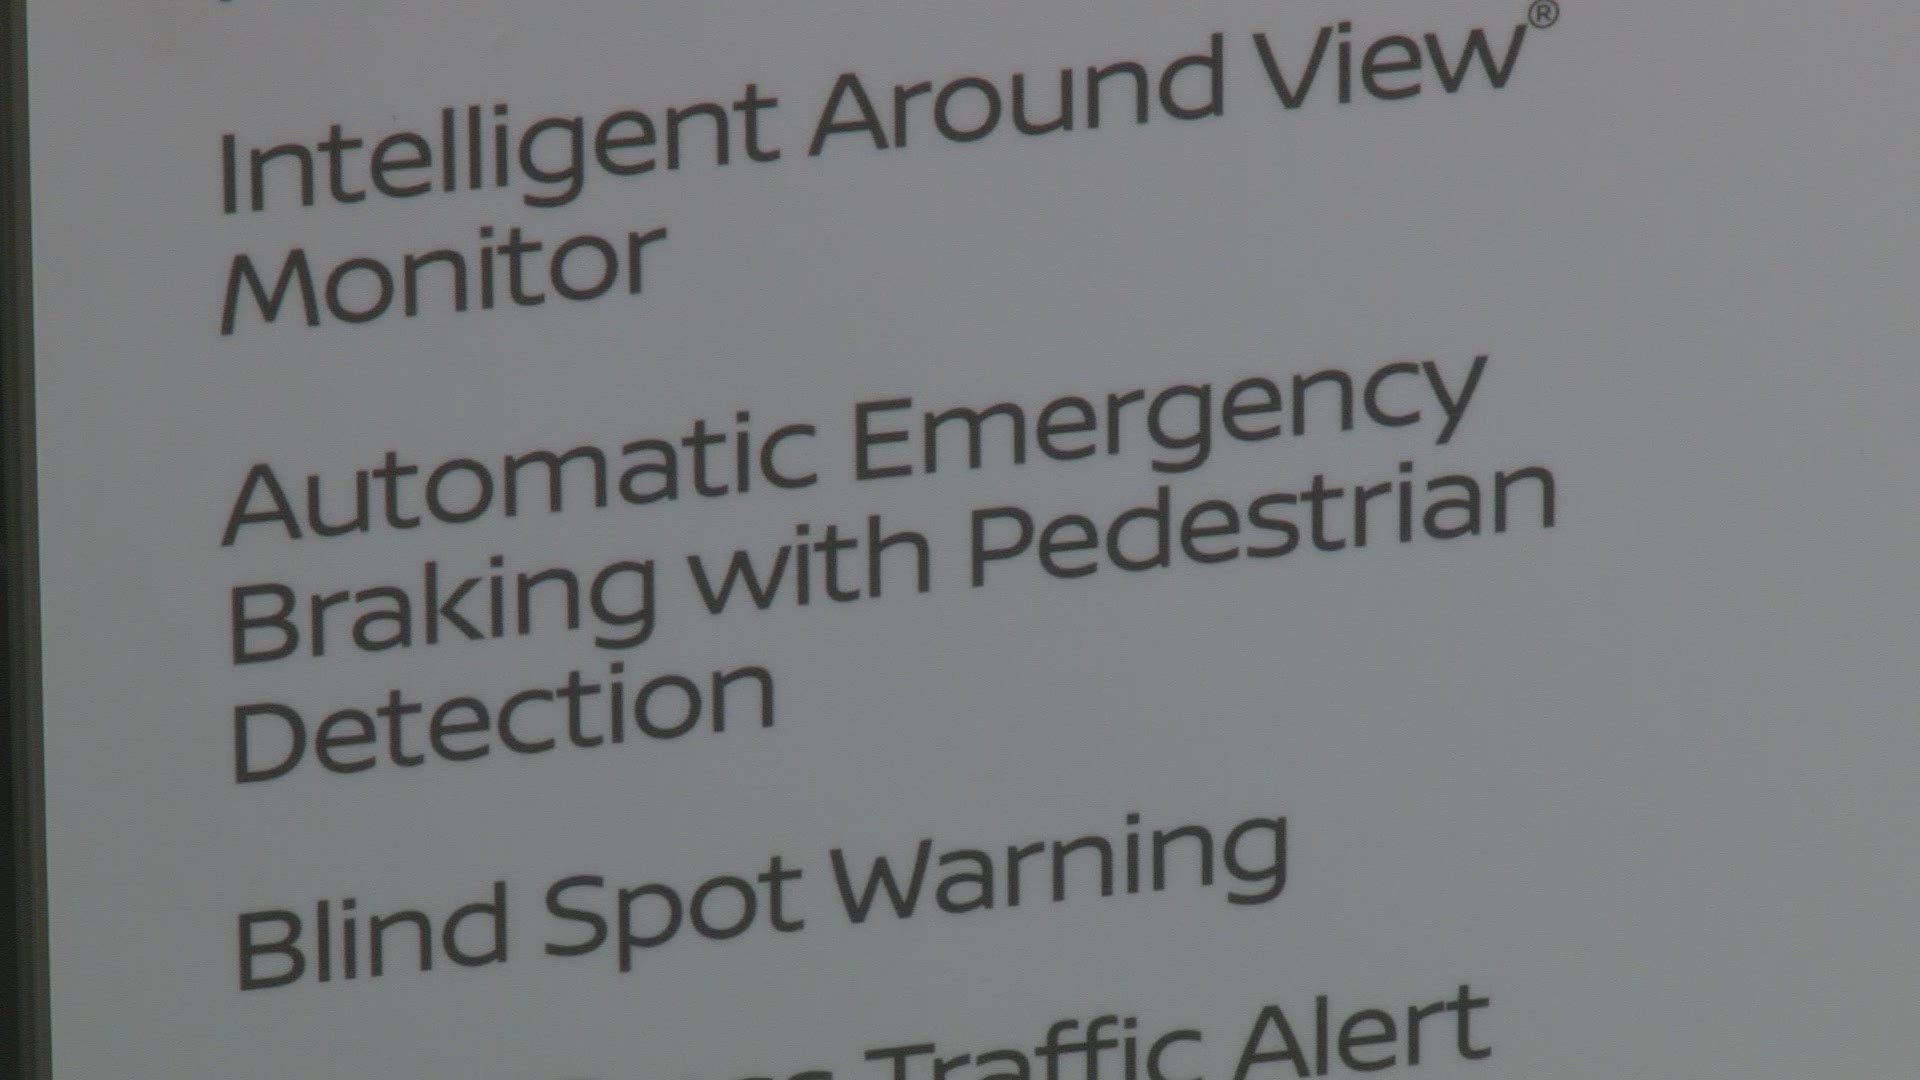 Pedestrian deaths are at a 30-year high. Car companies at the Washington Auto Show say they want to bring the number down.